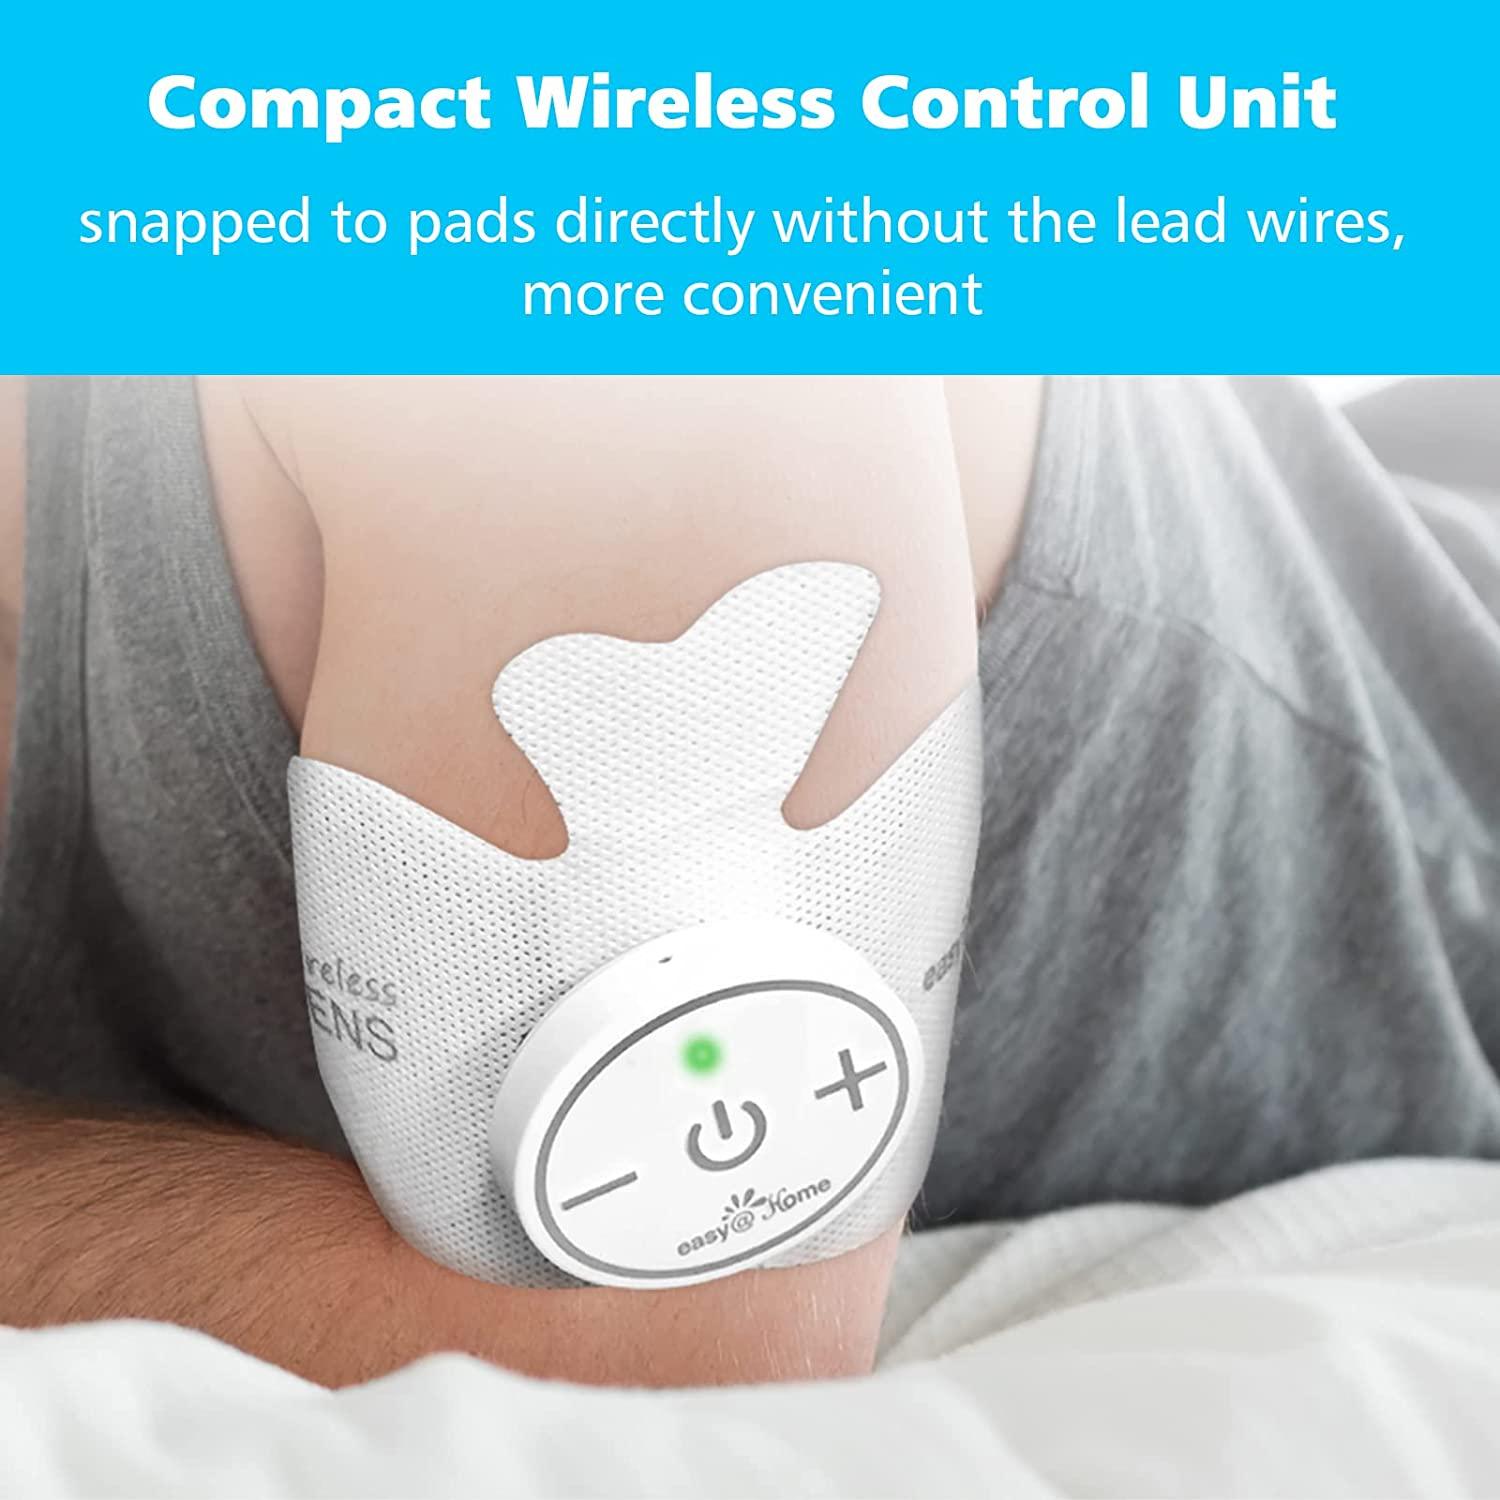 Easy@Home Compact Wireless TENS Unit - Electric EMS Muscle Stimulator Pain  Relief Therapy, EHE015